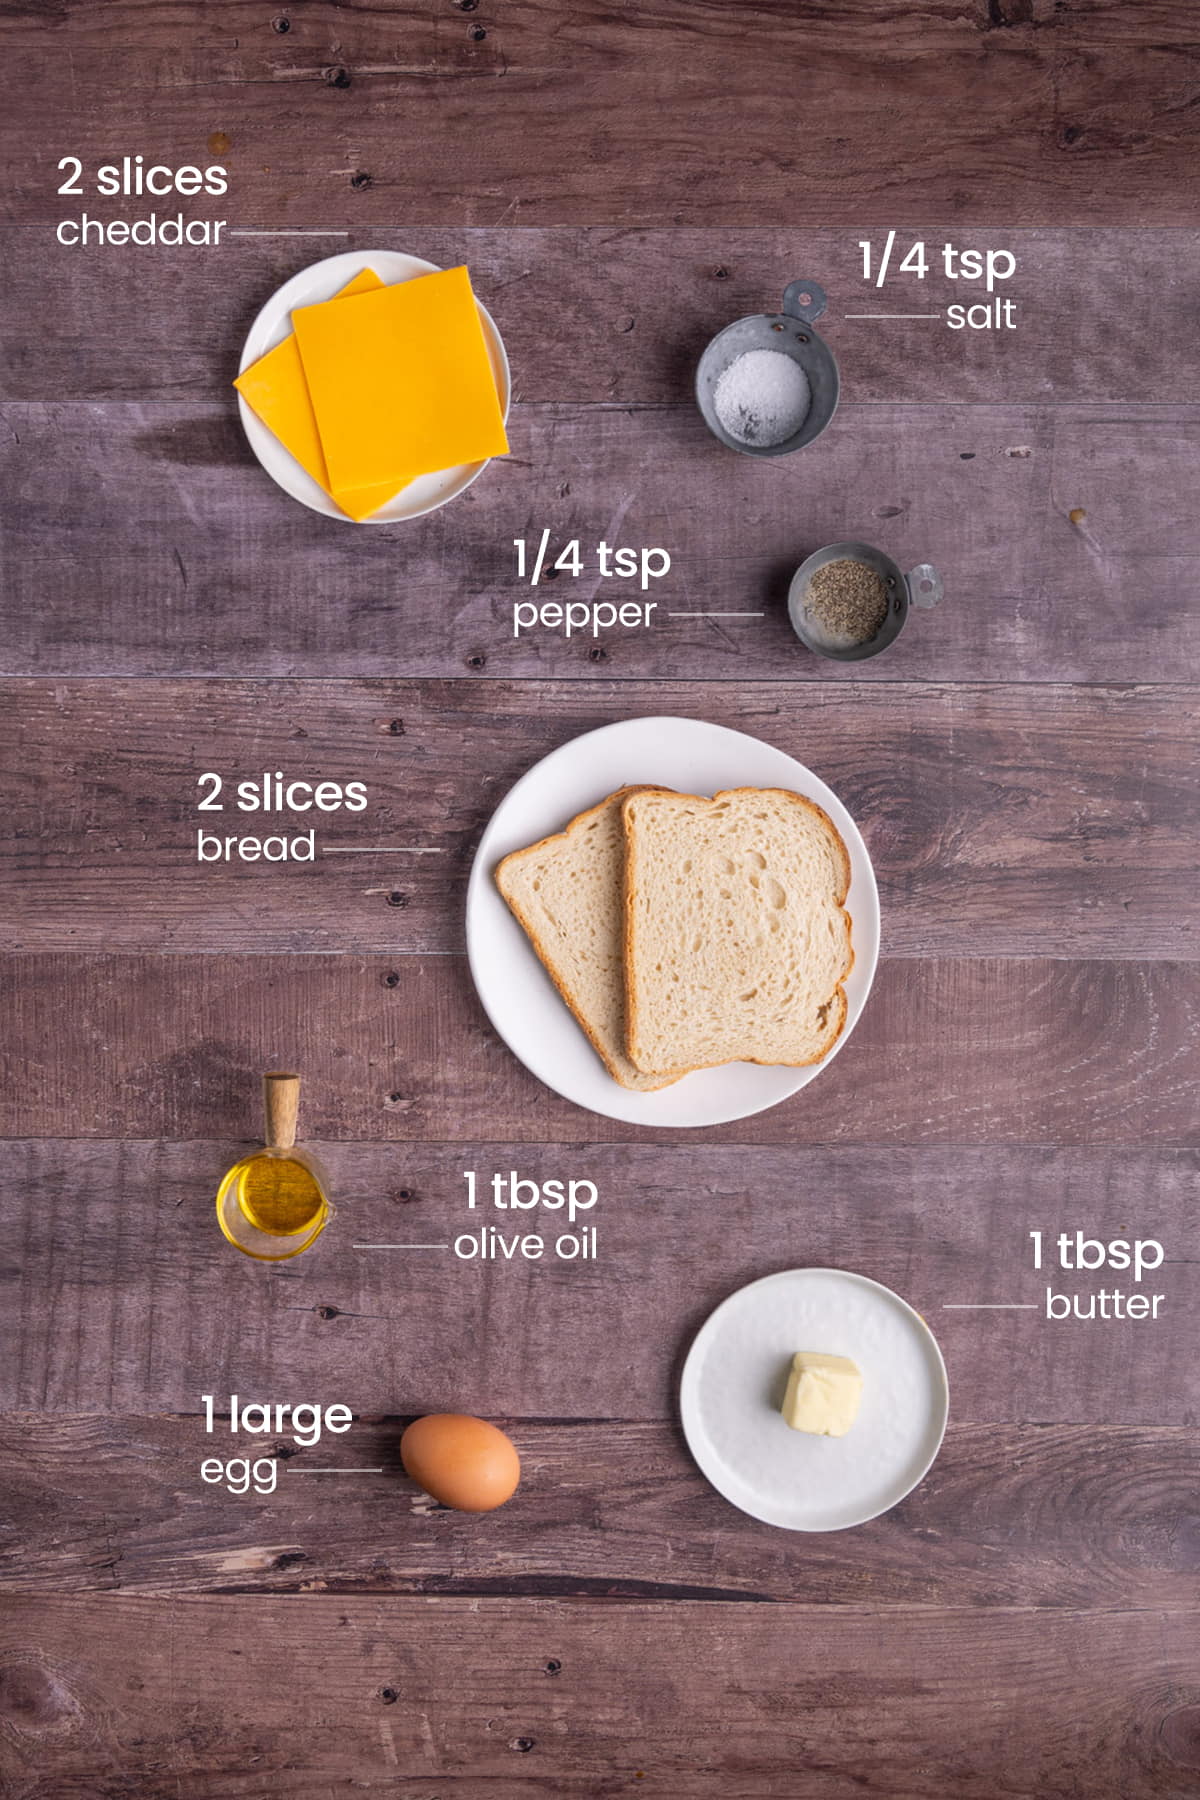 all ingredients for classic fried egg and cheese breakfast sandwich - cheddar cheese, salt, pepper, bread, olive oil, butter, egg